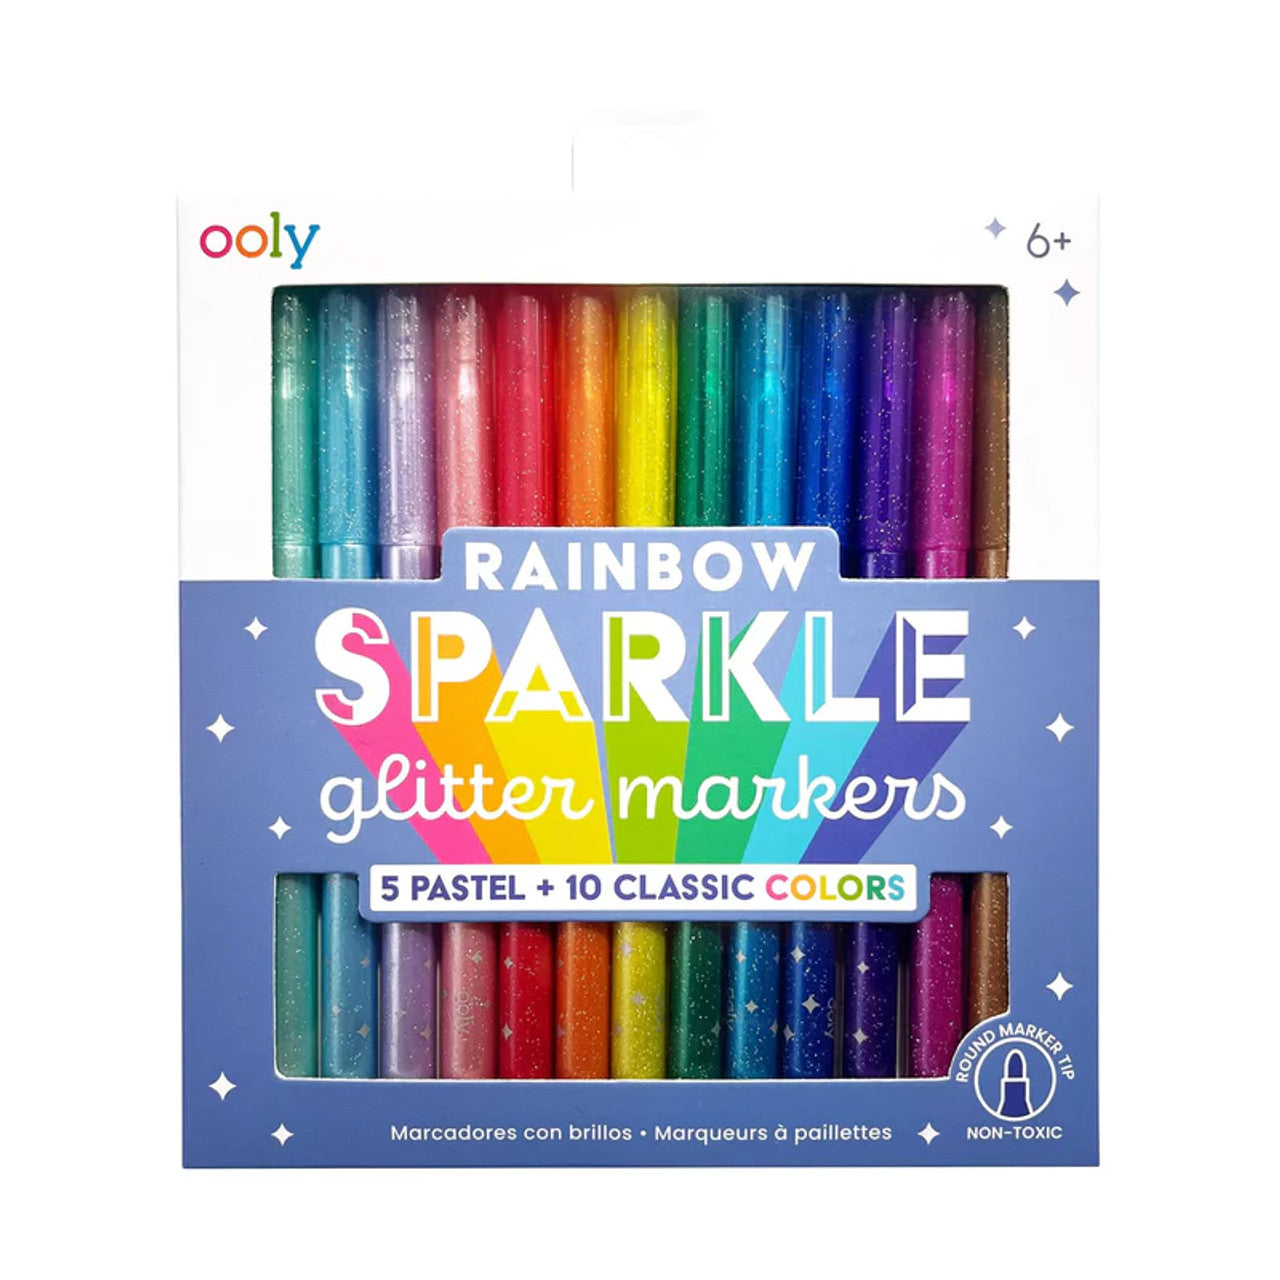 Ooly: Rainbow Sparkle glitter markers